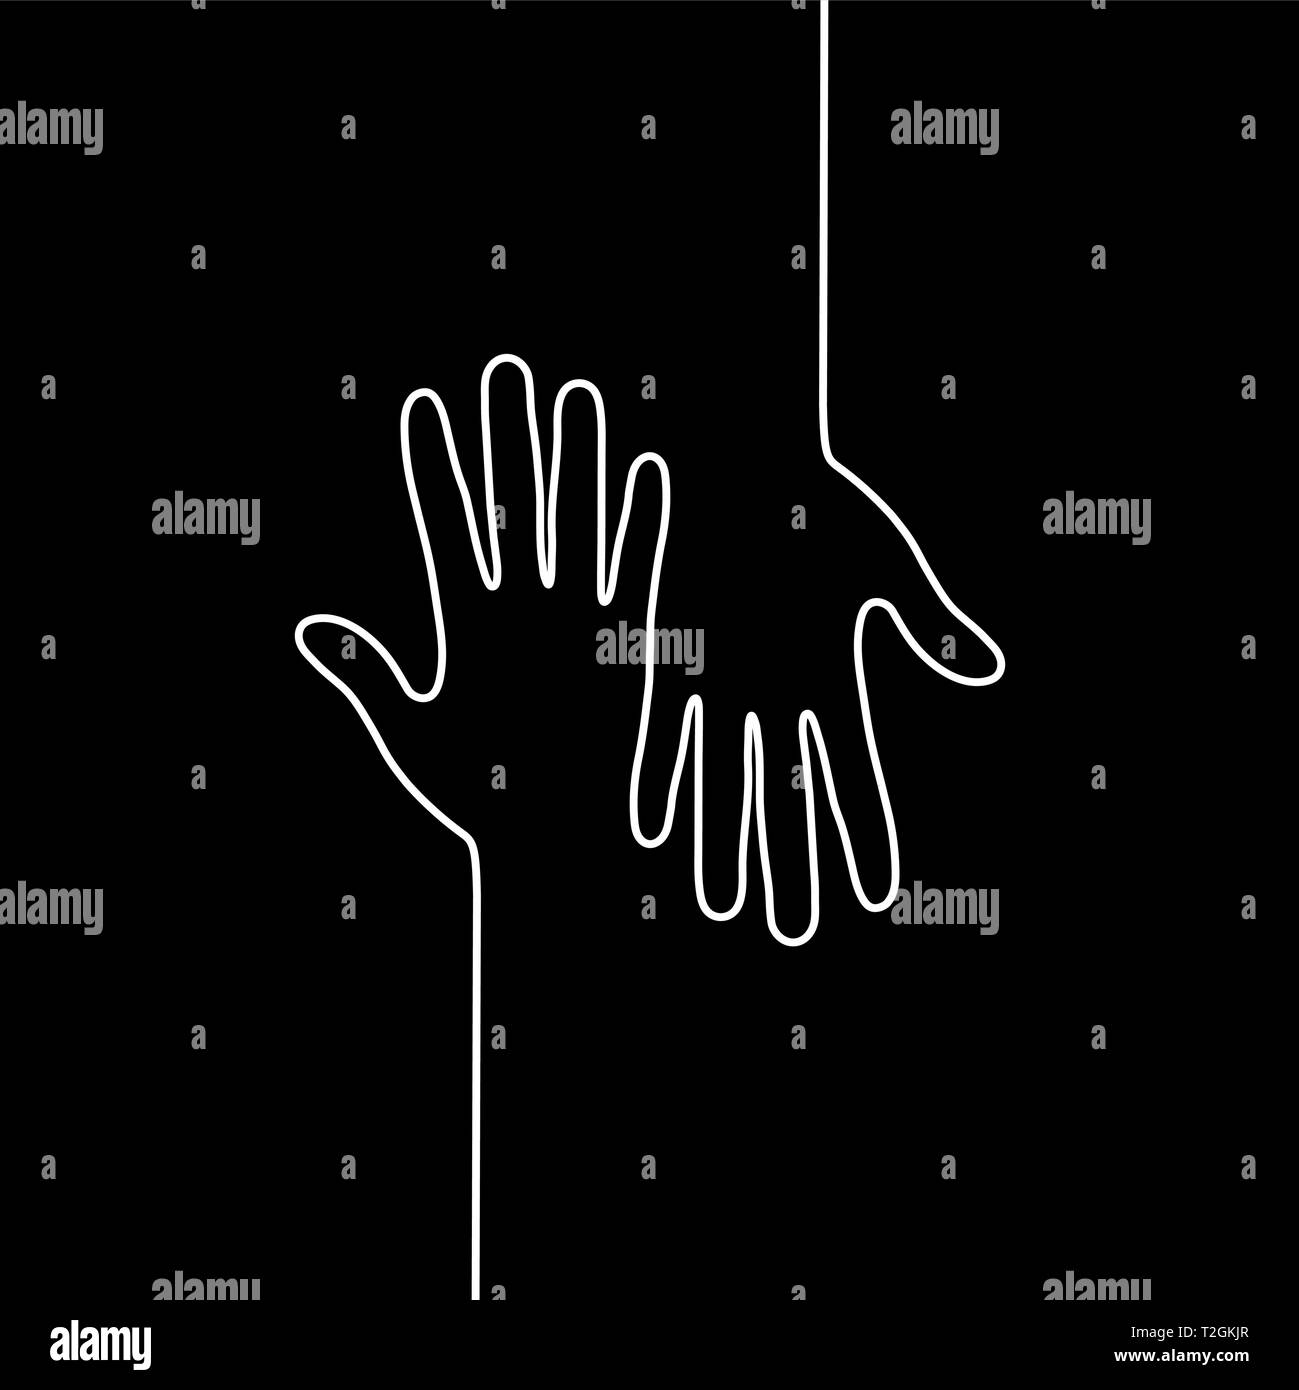 White outline of two hands with fingers on black background, simple design Stock Vector